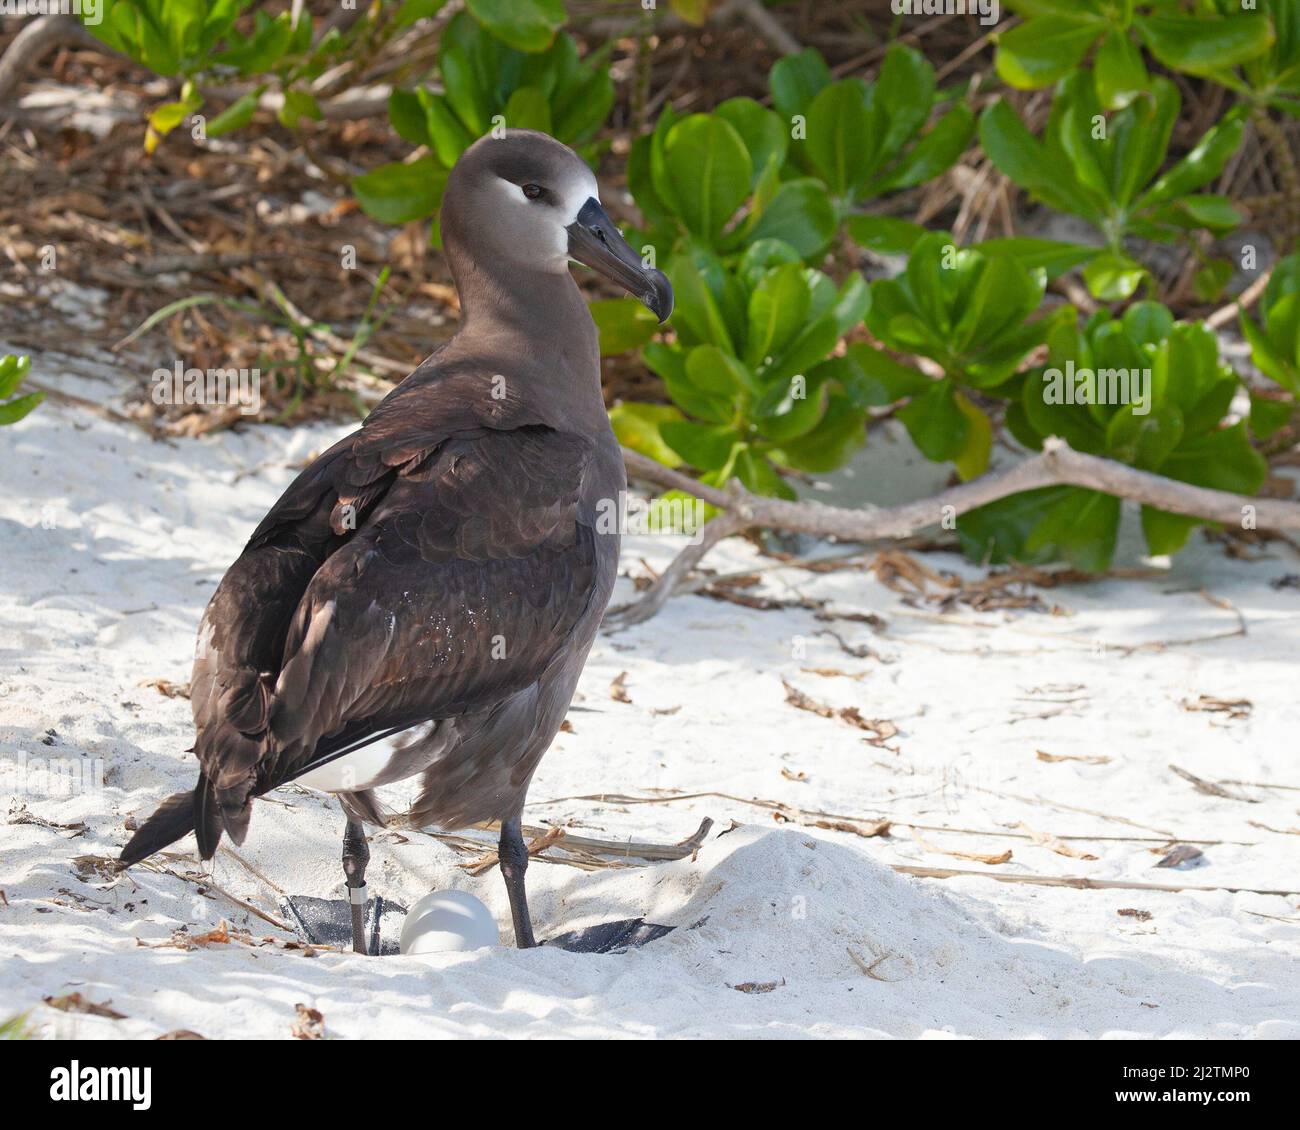 Black-footed Albatross adult bird standing over one egg in sand nest on a Pacific island beach. Phoebastria nigripes Stock Photo